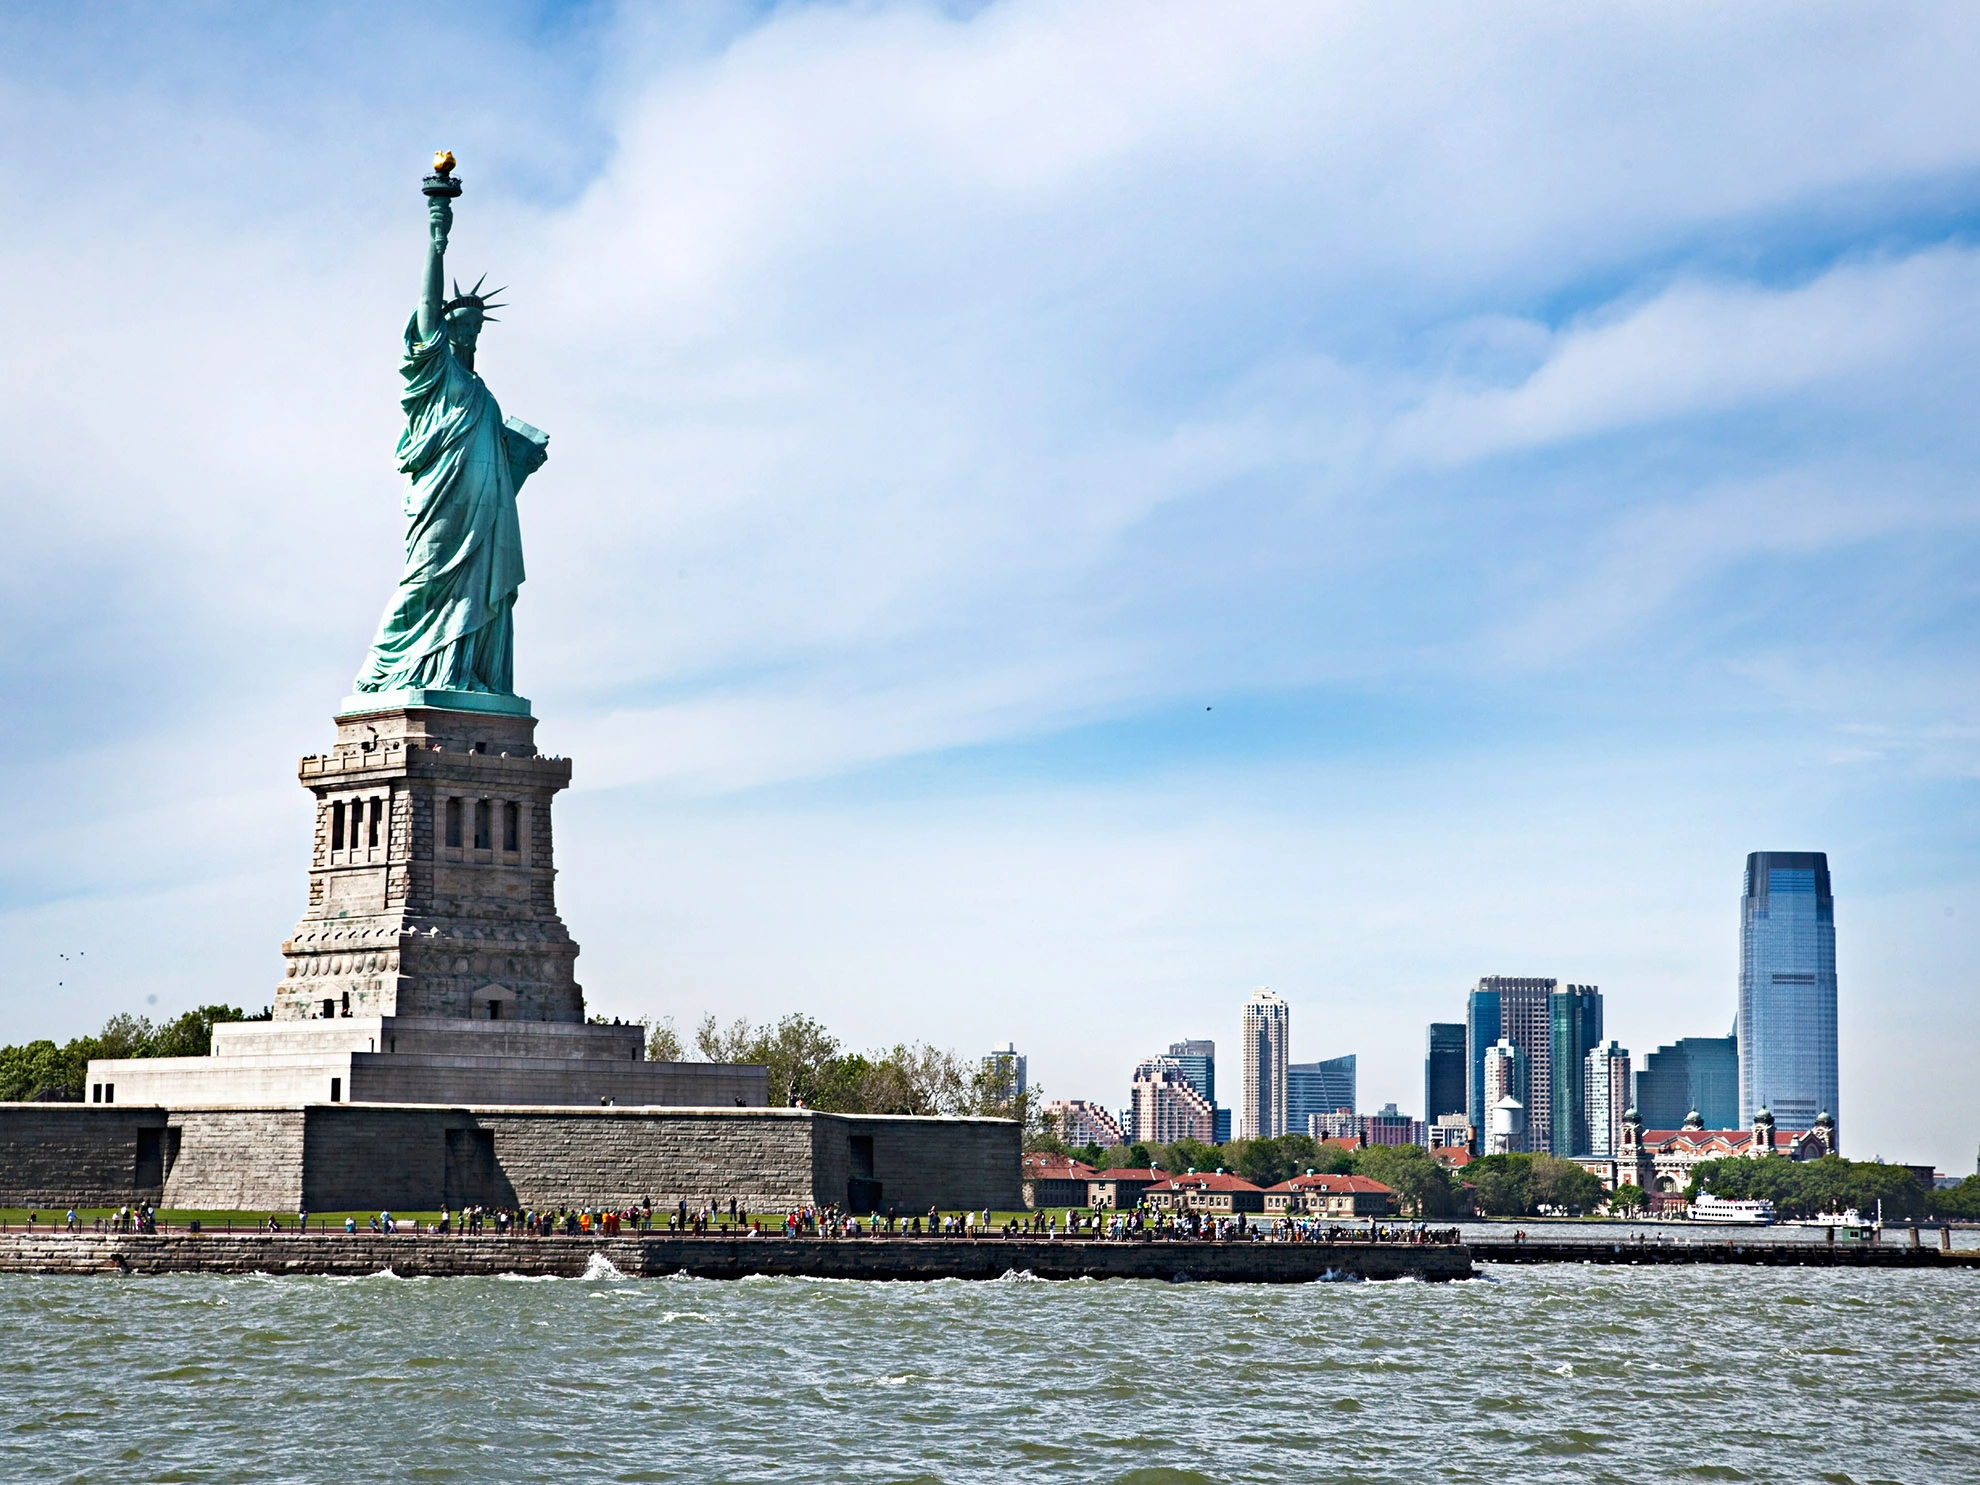 The Statue of Liberty stands tall, holding her torch aloft in New York Harbor, a symbol of freedom and hope.